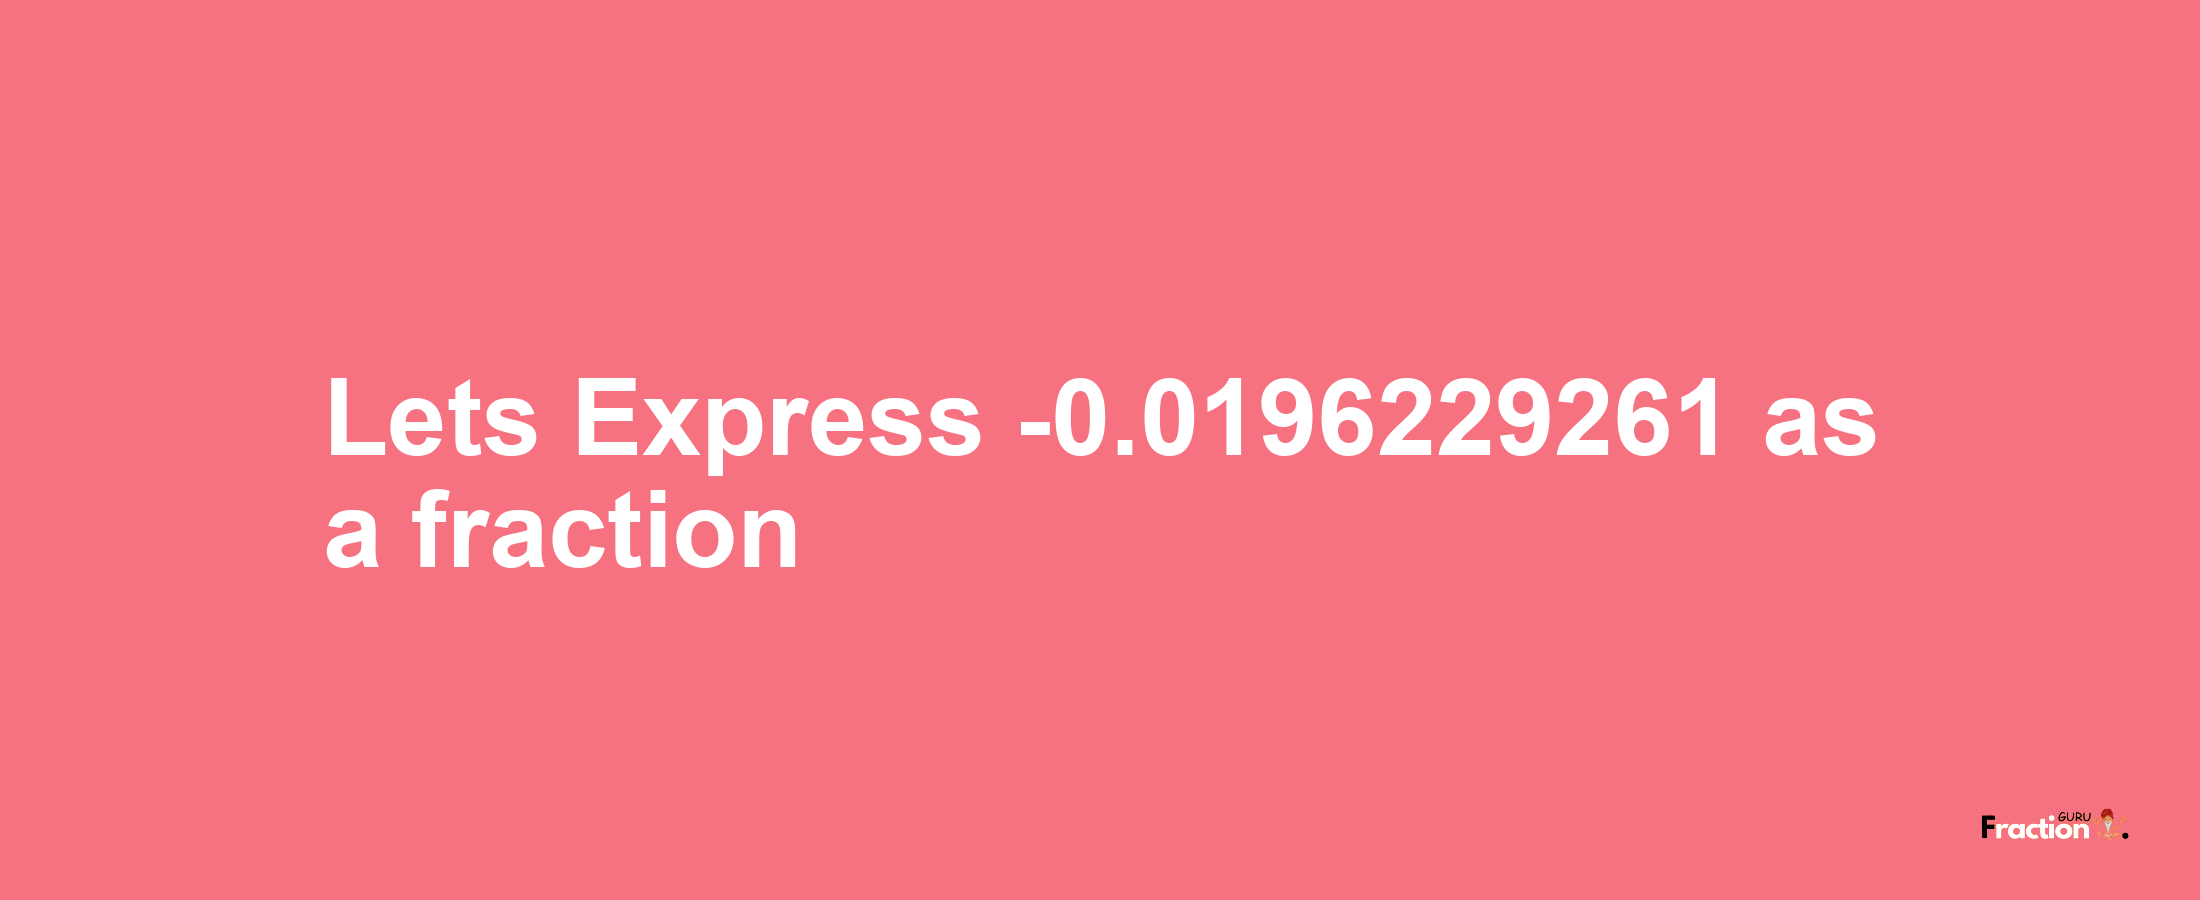 Lets Express -0.0196229261 as afraction